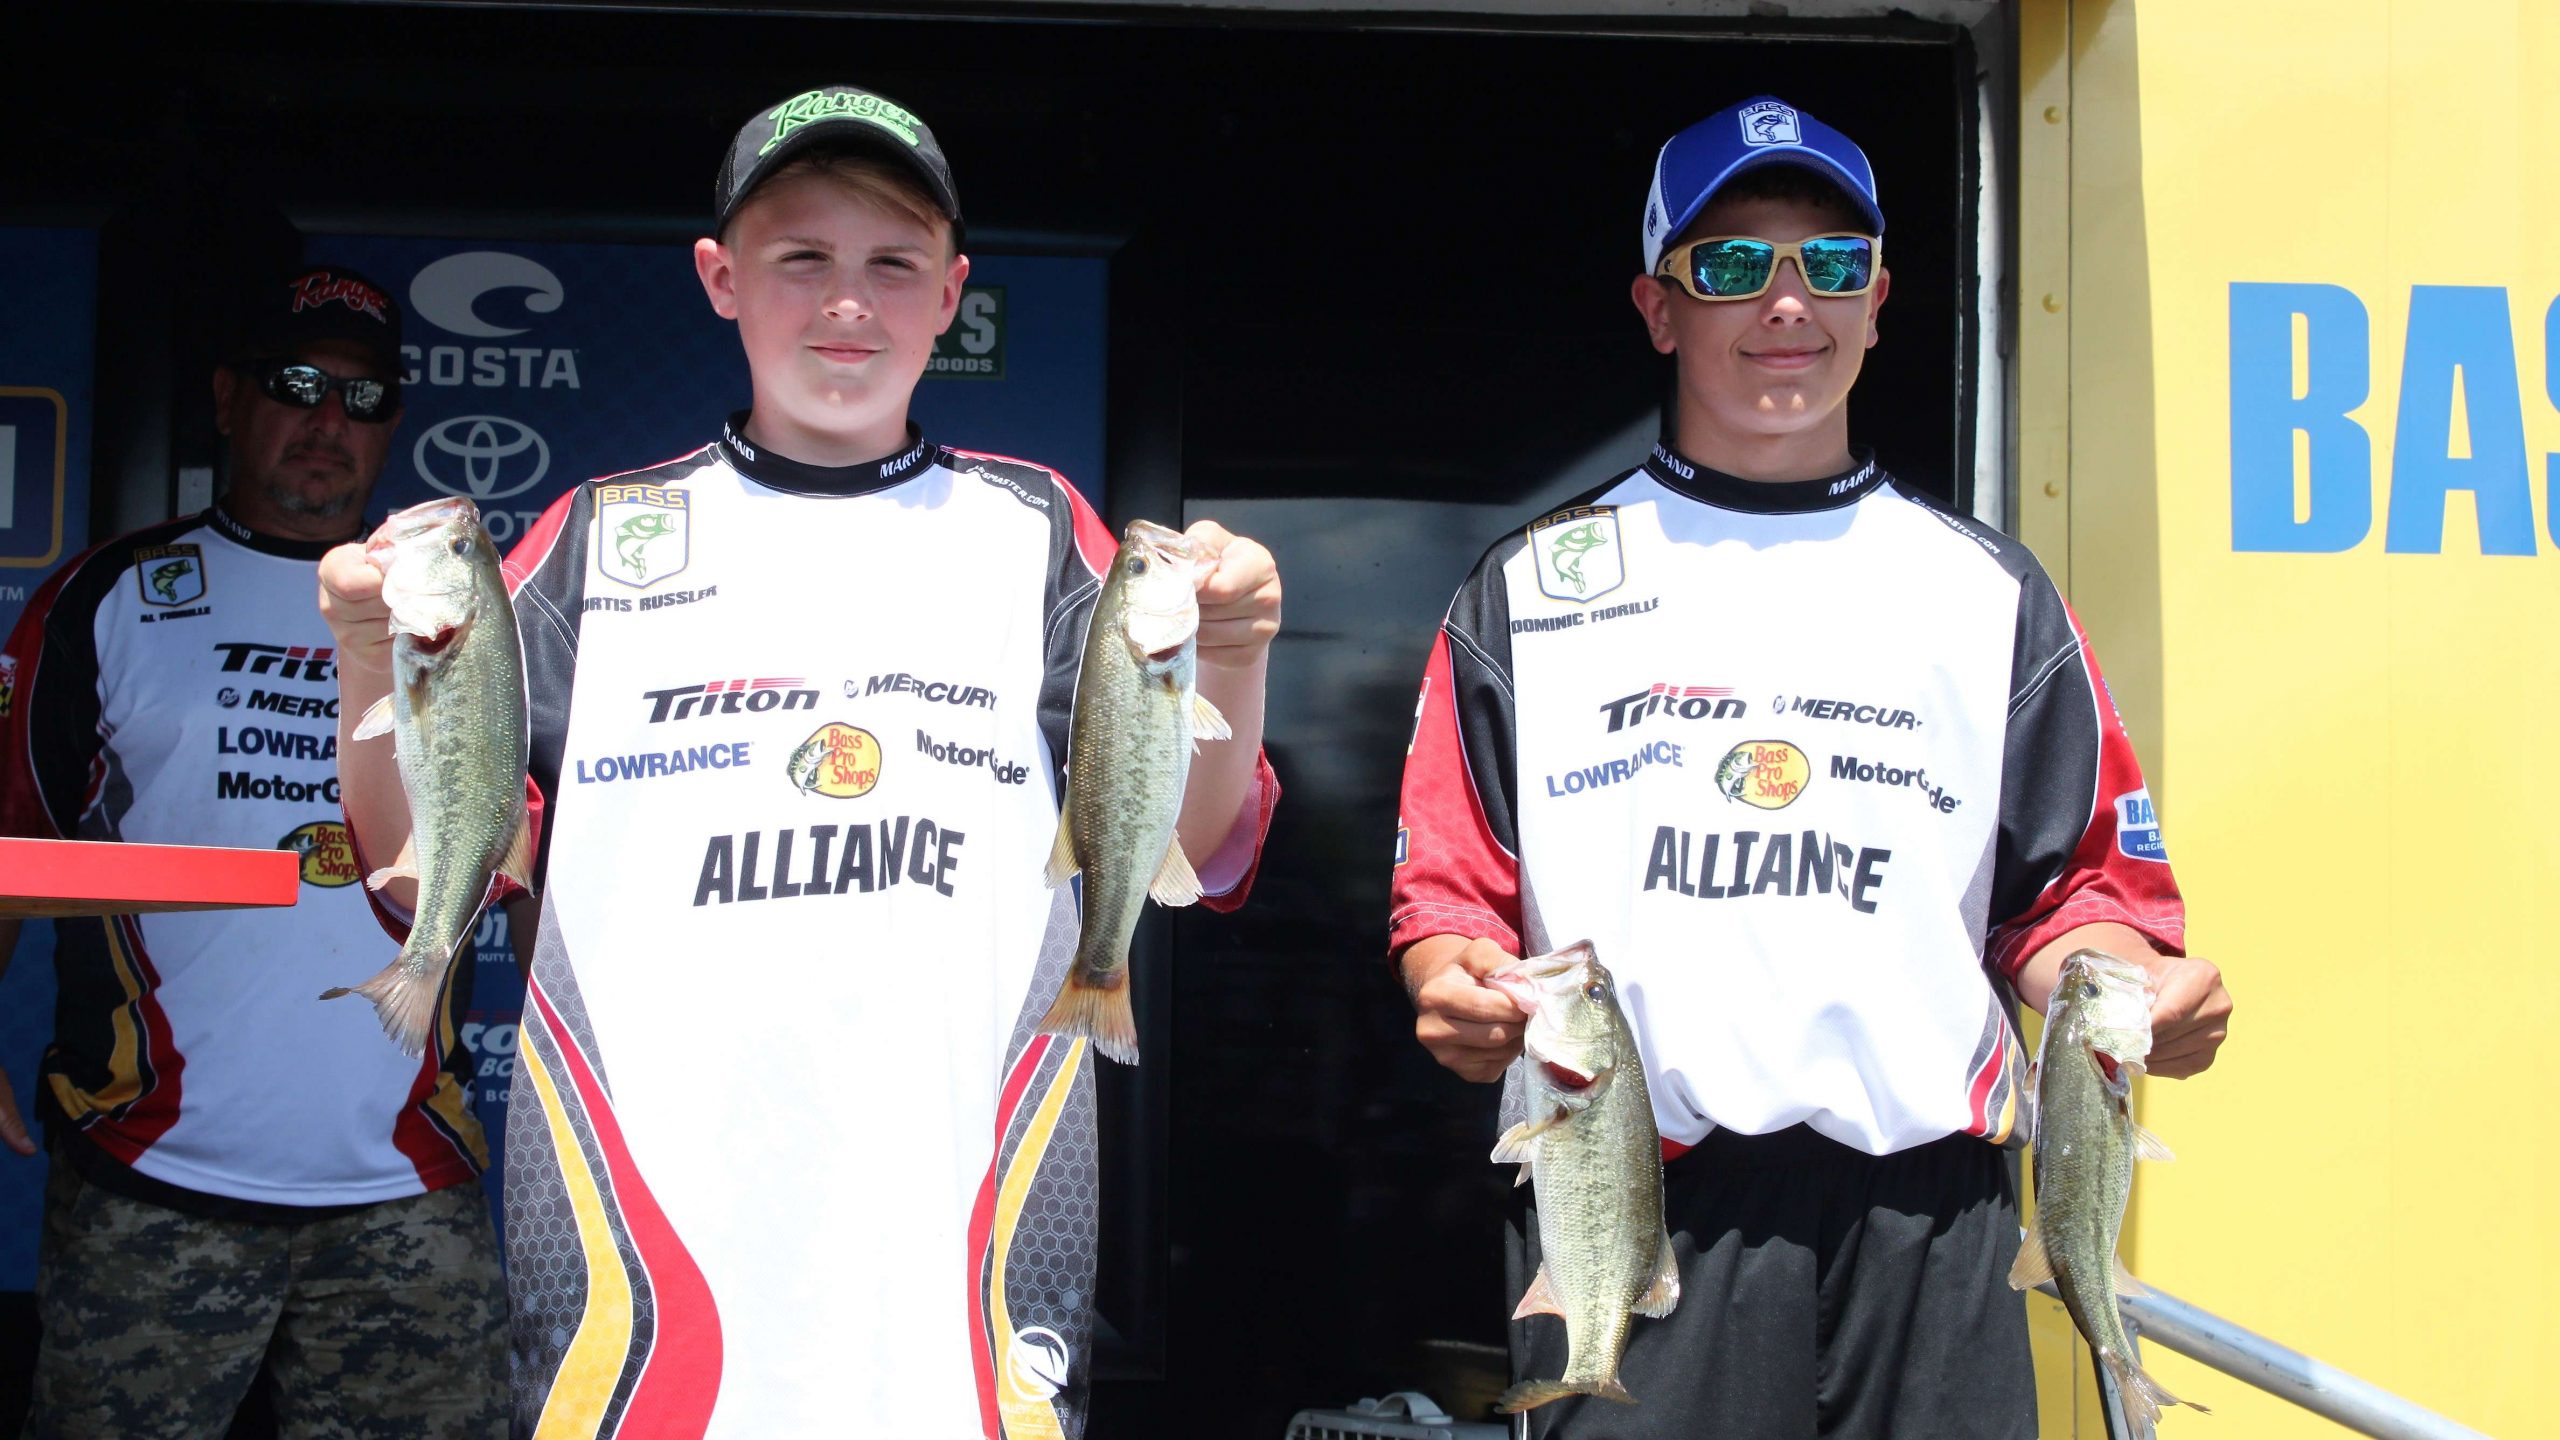 Dominic Fiorelle and Curtis Russler of Maryland are in 22nd place with 5-11.
